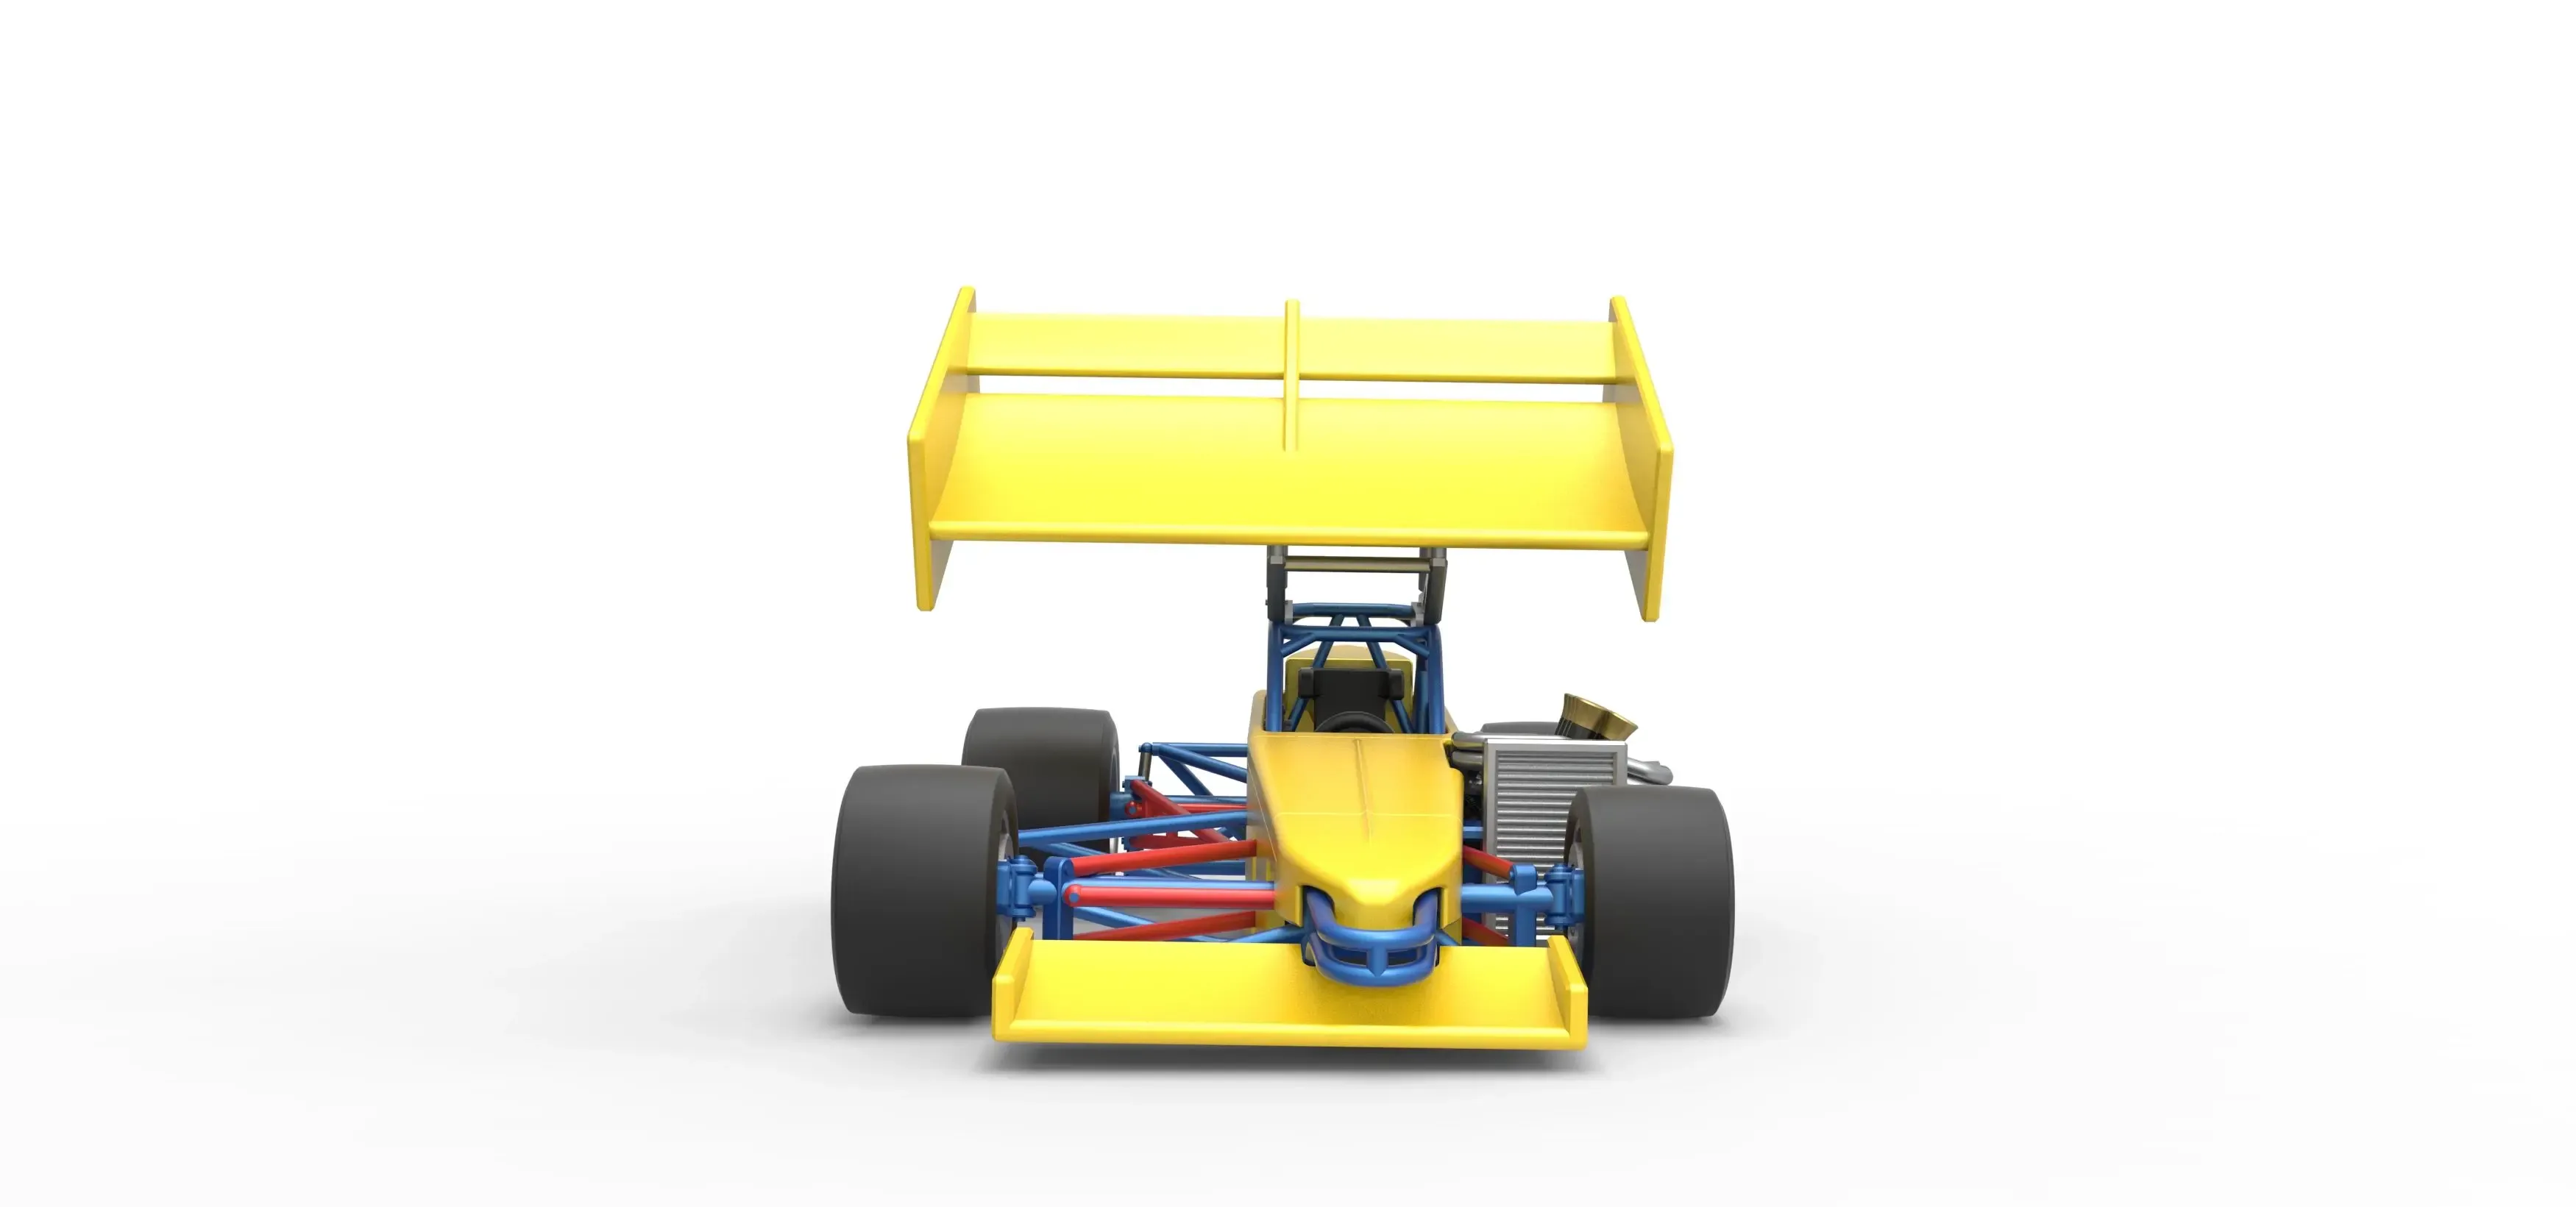 Supermodified front engine Winged race car V2 Scale 1:25